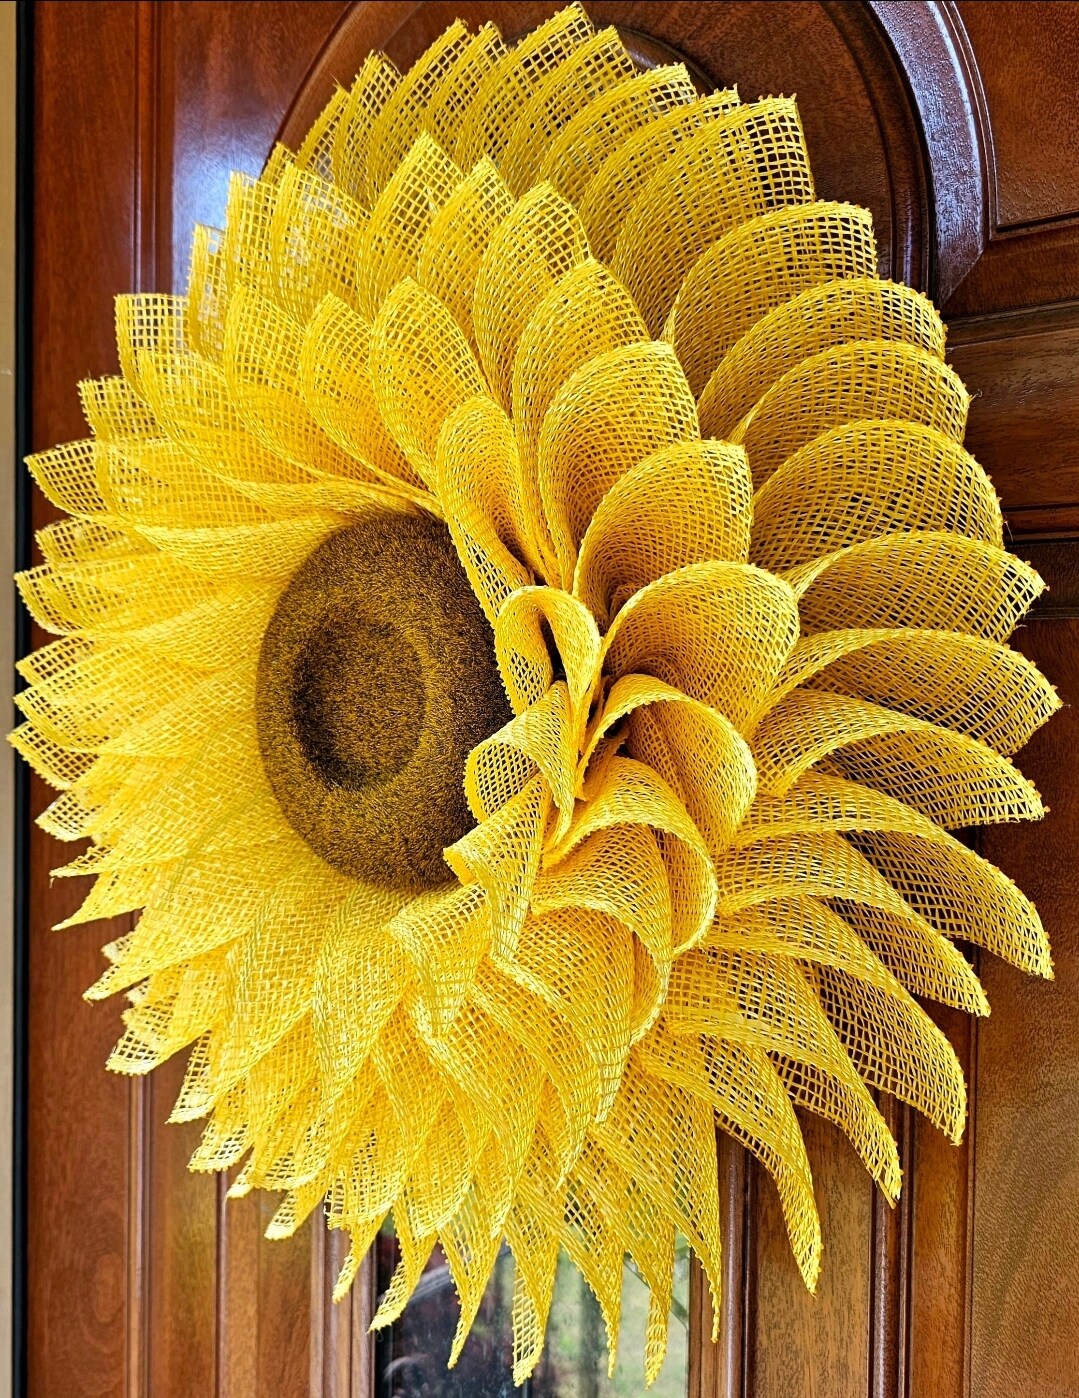 Yellow Sunflower Front And Double Door Burlap Flower Wreath For Spring Summer Fall Seasonal Porch Decor Outdoor Decorations Home Gift Idea